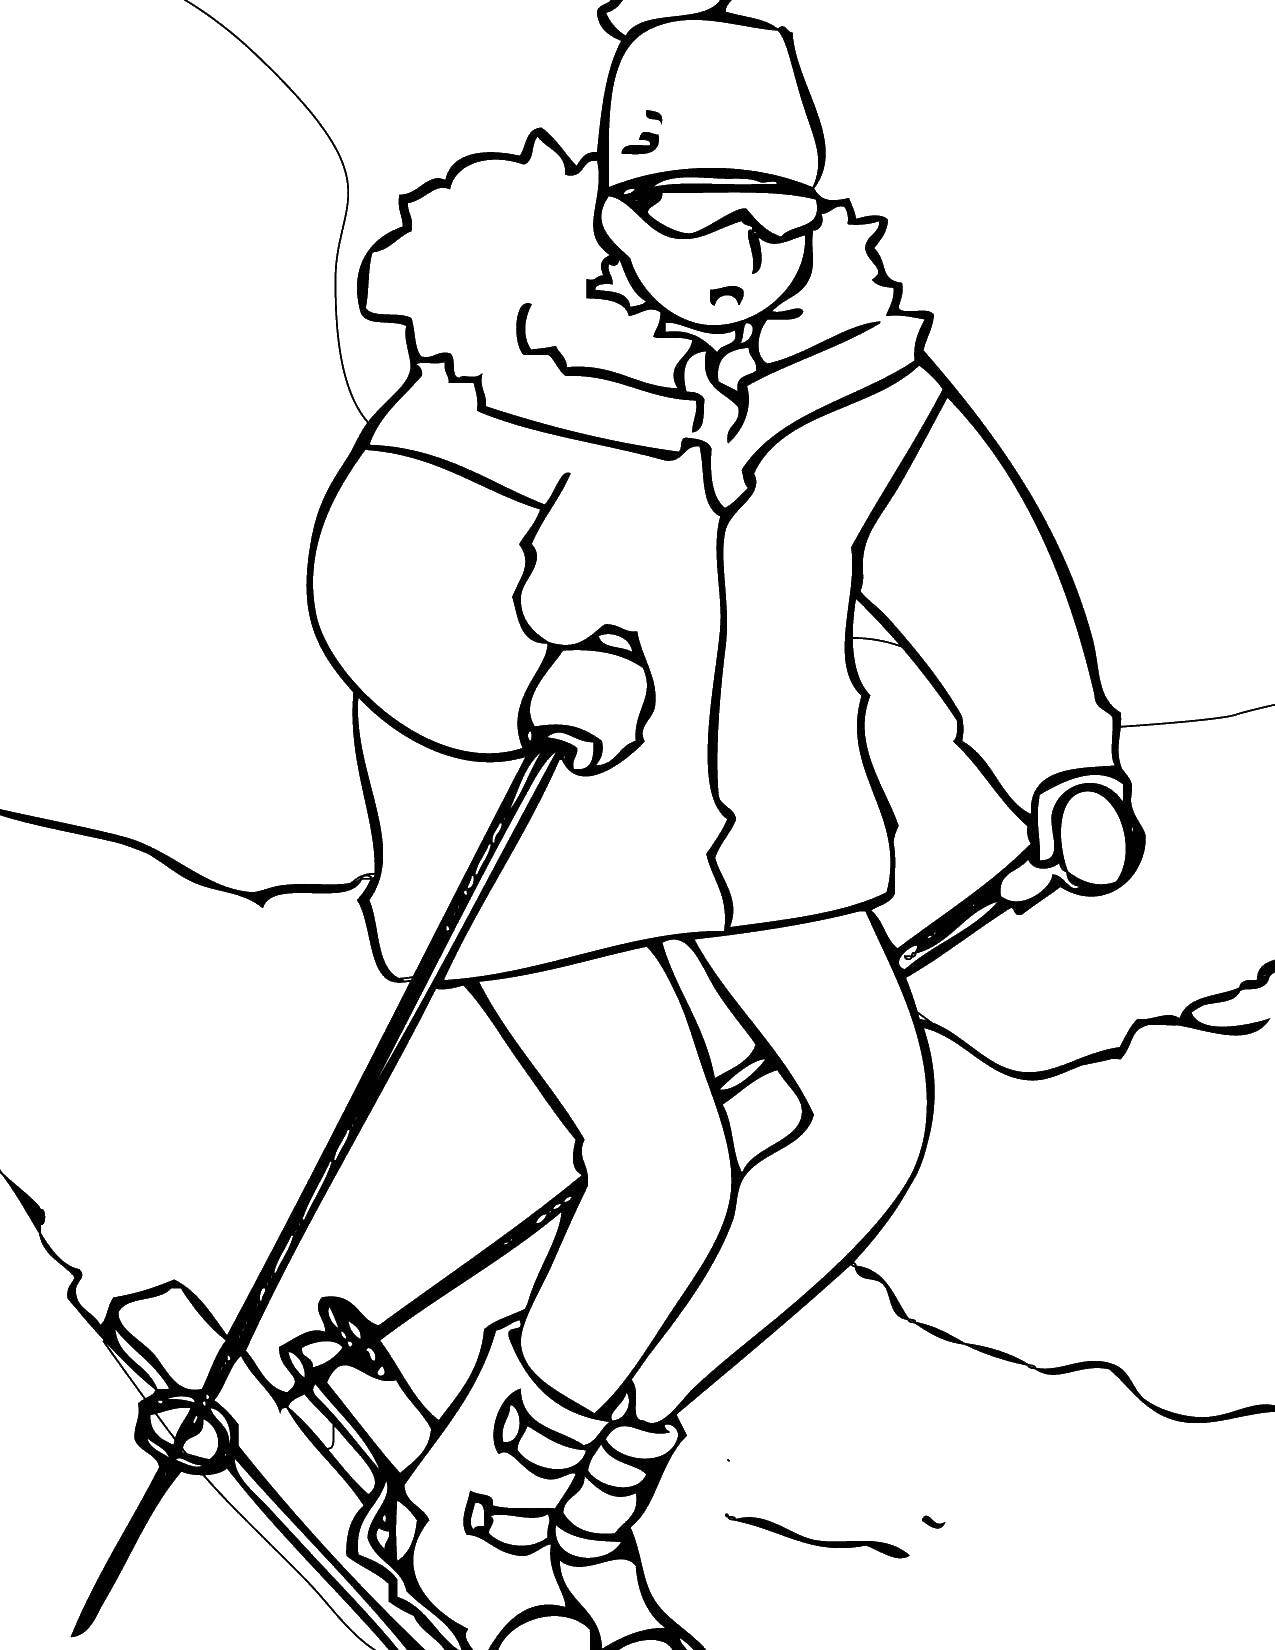 Coloring Skier. Category Sports. Tags:  sport, skier, skiing.